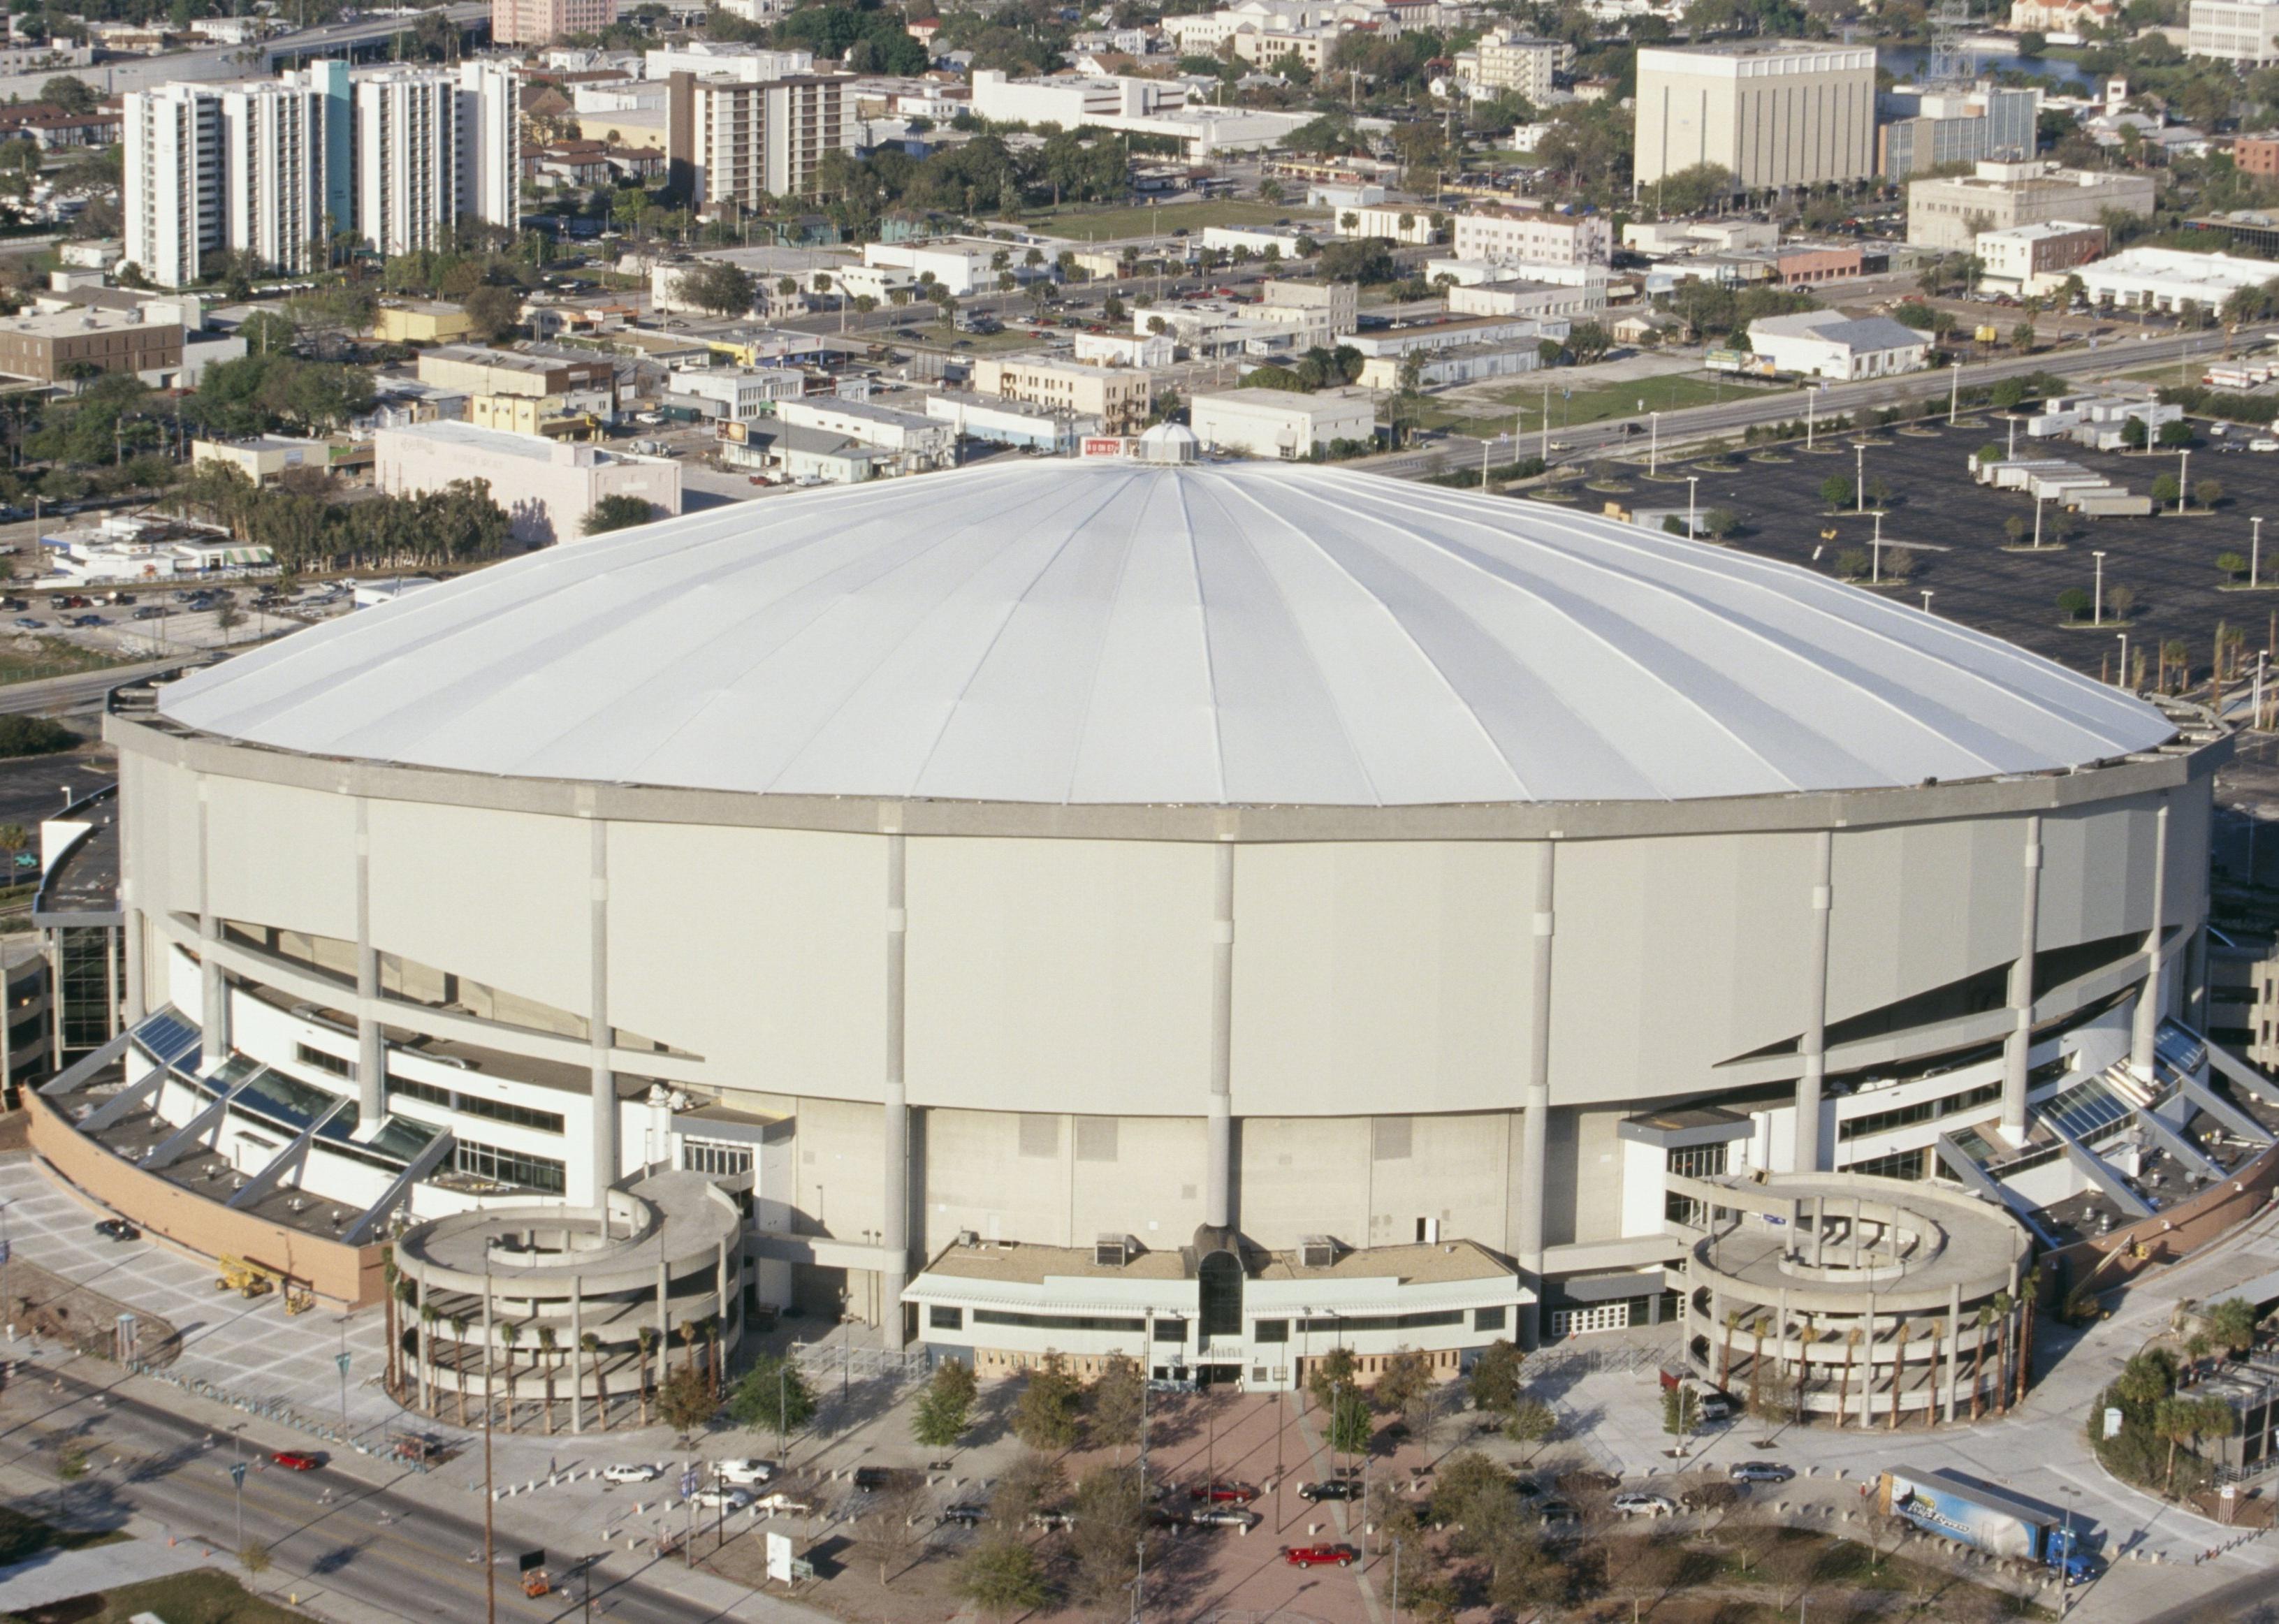 Aerial view of Tropicana Field, home of the Tampa Bay Devil Rays, 1998.